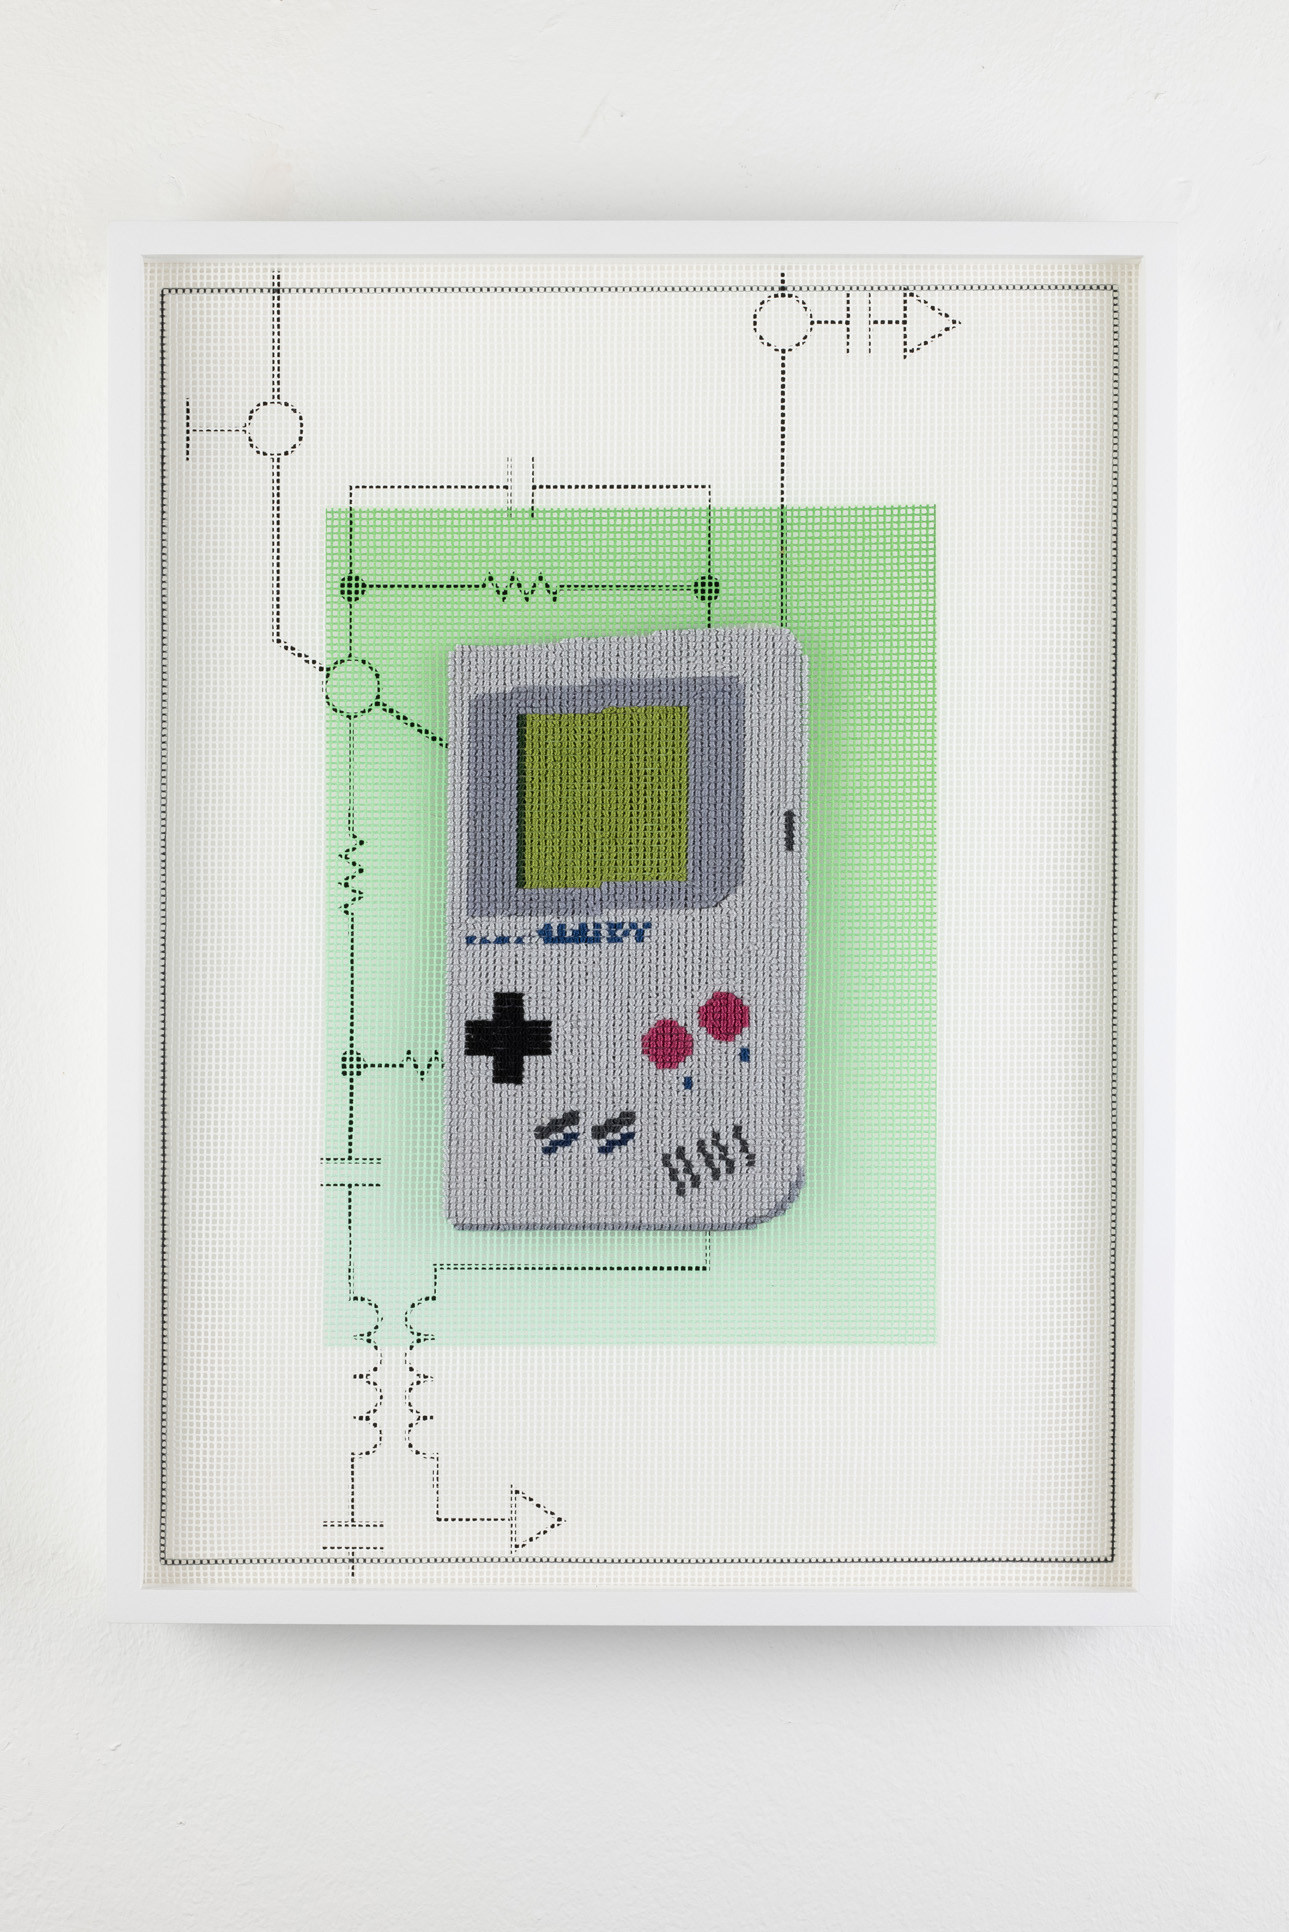 Early Digital Tech, Artifacts from The Age of Acceleration (Nintendo Gameboy (1989)), 2021